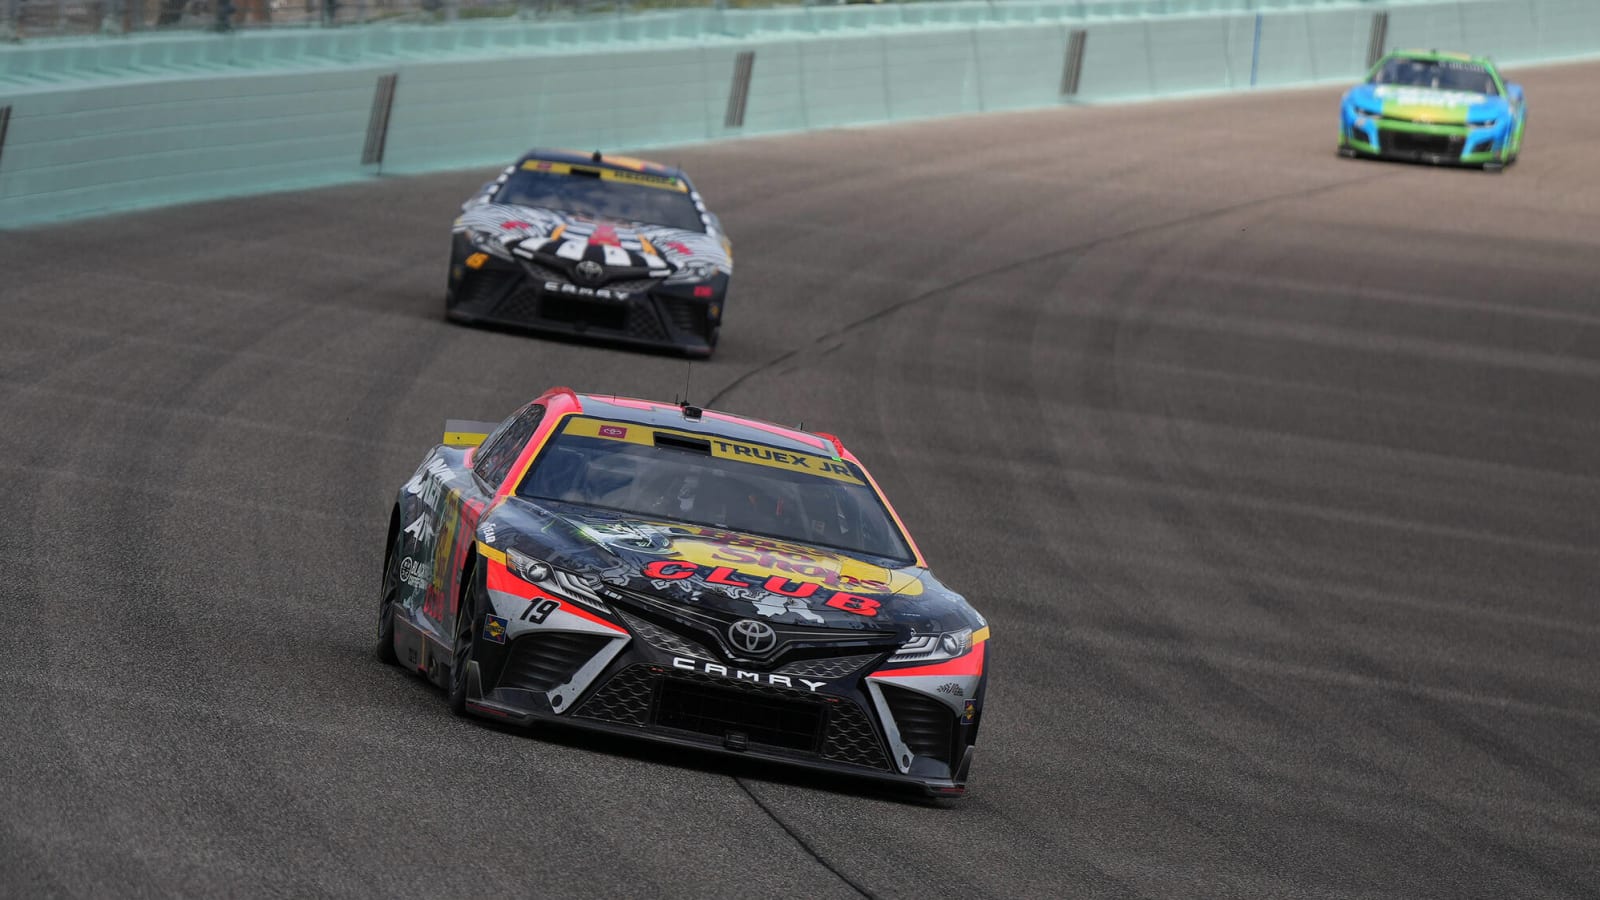 Martin Truex Jr. is determined to win the elusive Daytona 500 trophy with retirement on the horizon  